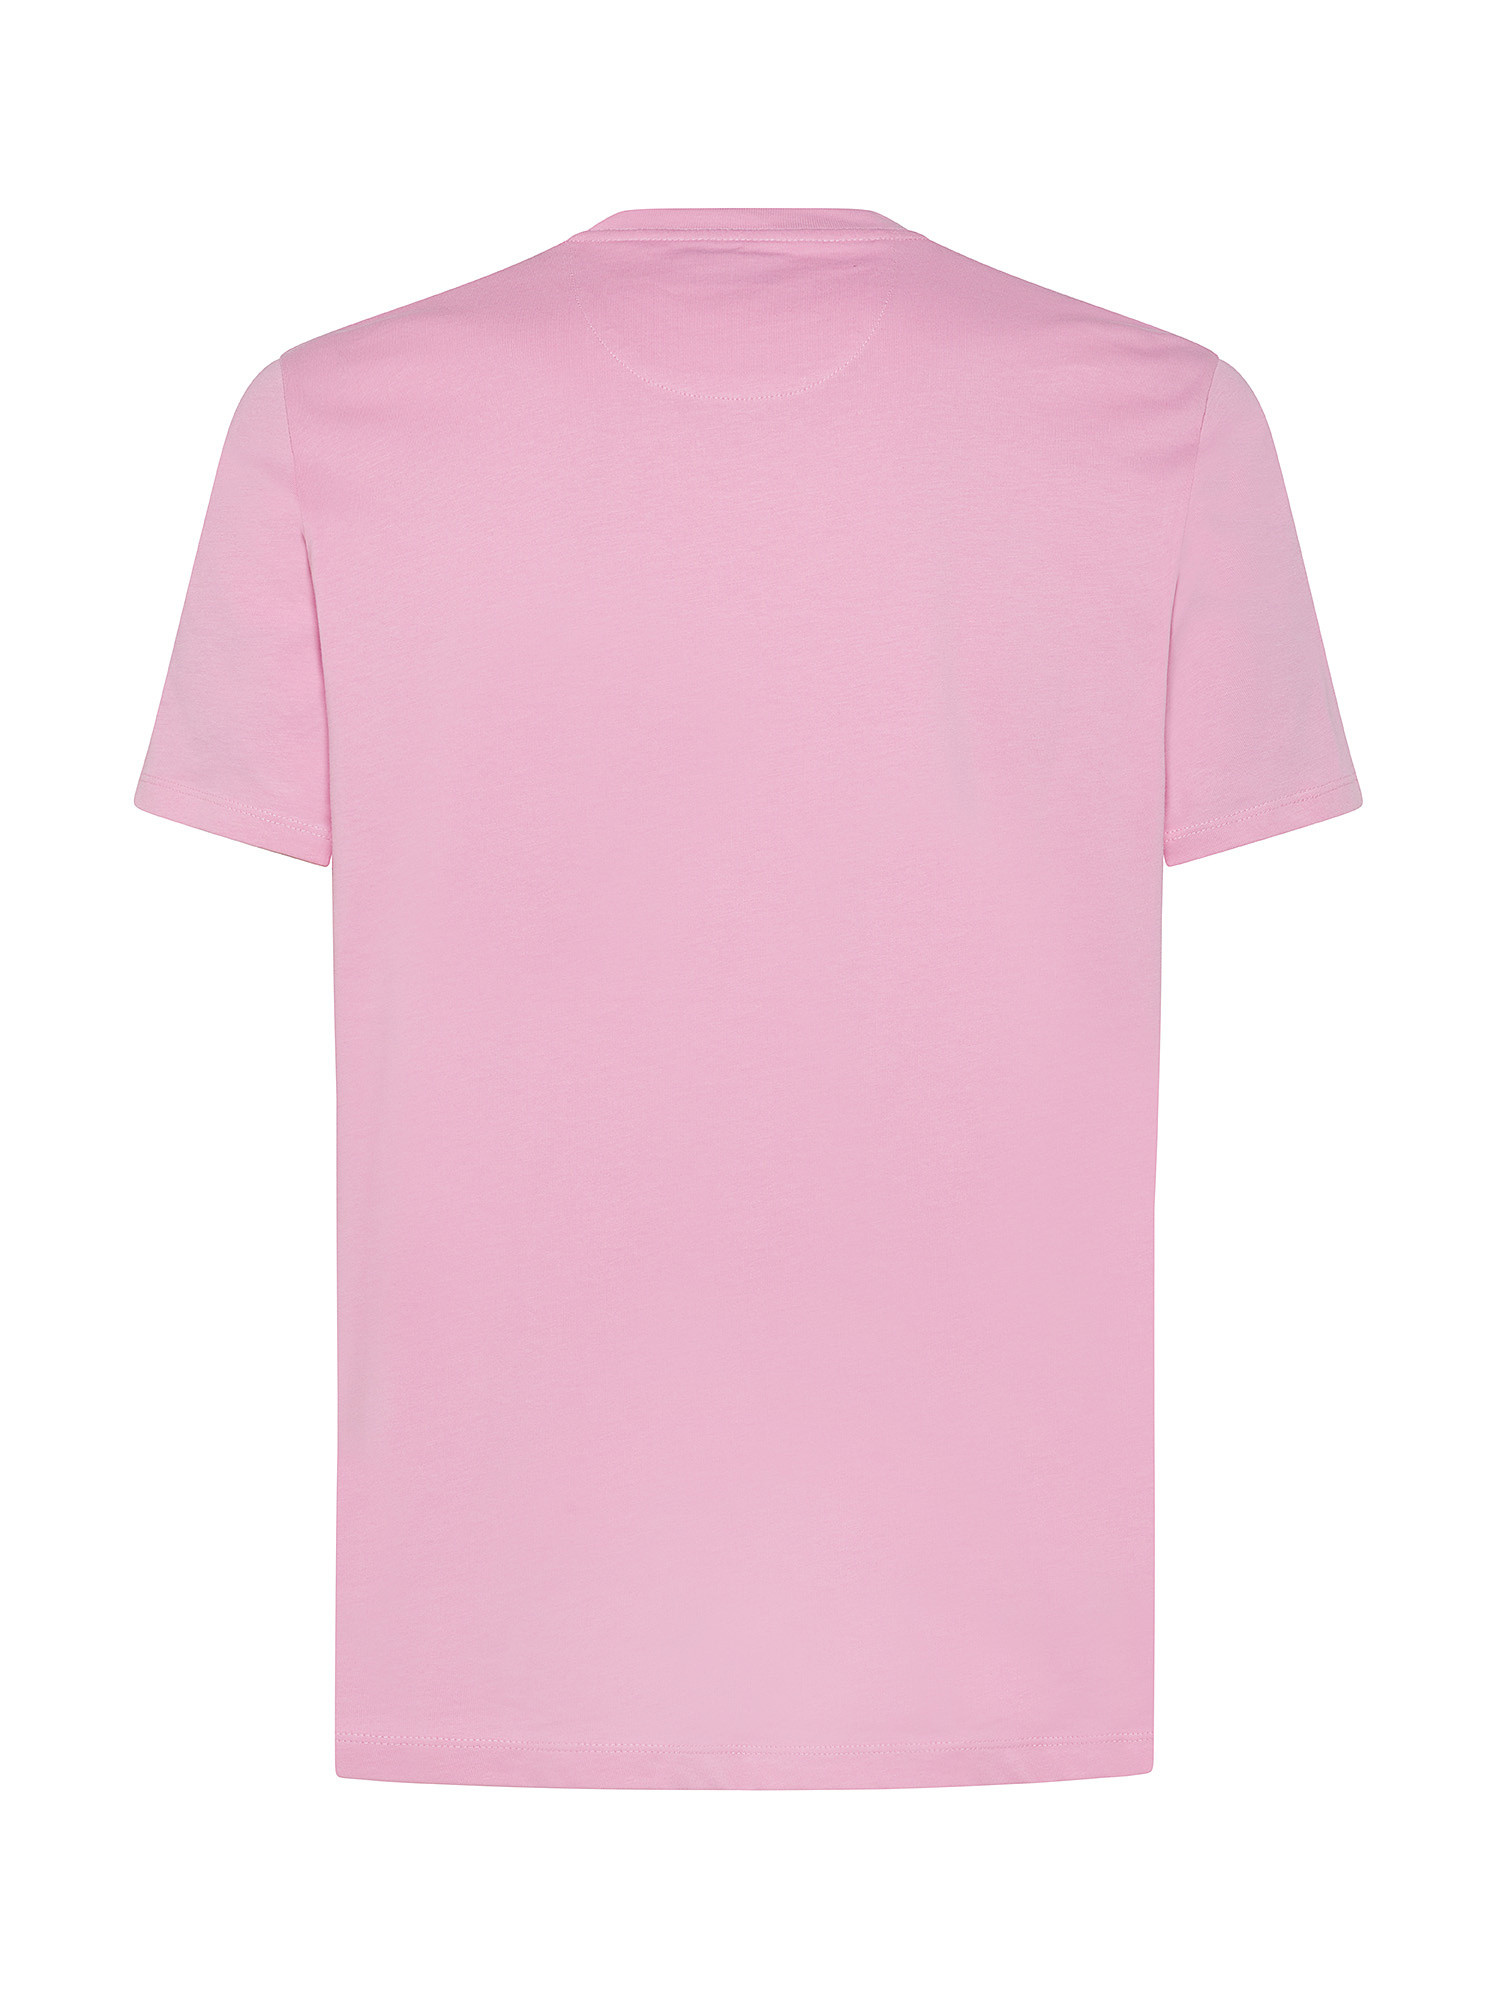 JCT - Pure supima cotton T-shirt, Pink, large image number 1